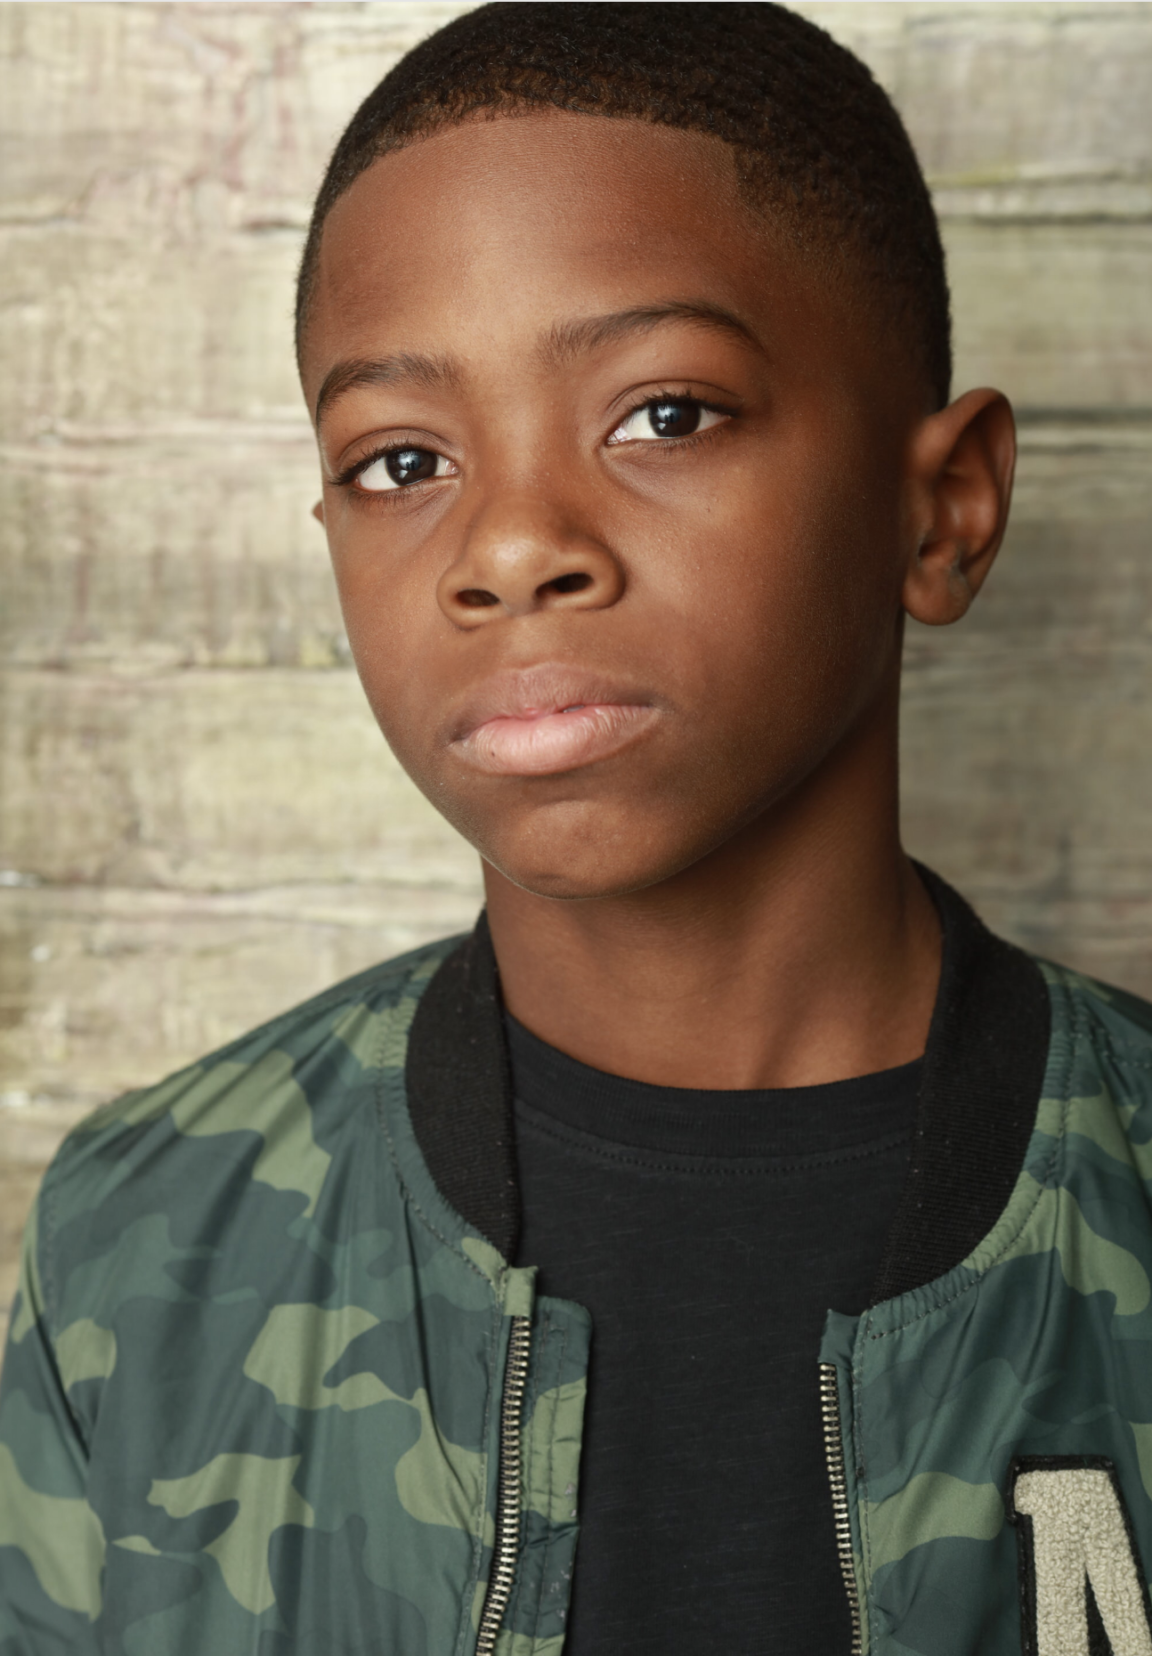 Getting To Know Young Actor Christopher Farrar (Q&A) – Celeb Secrets